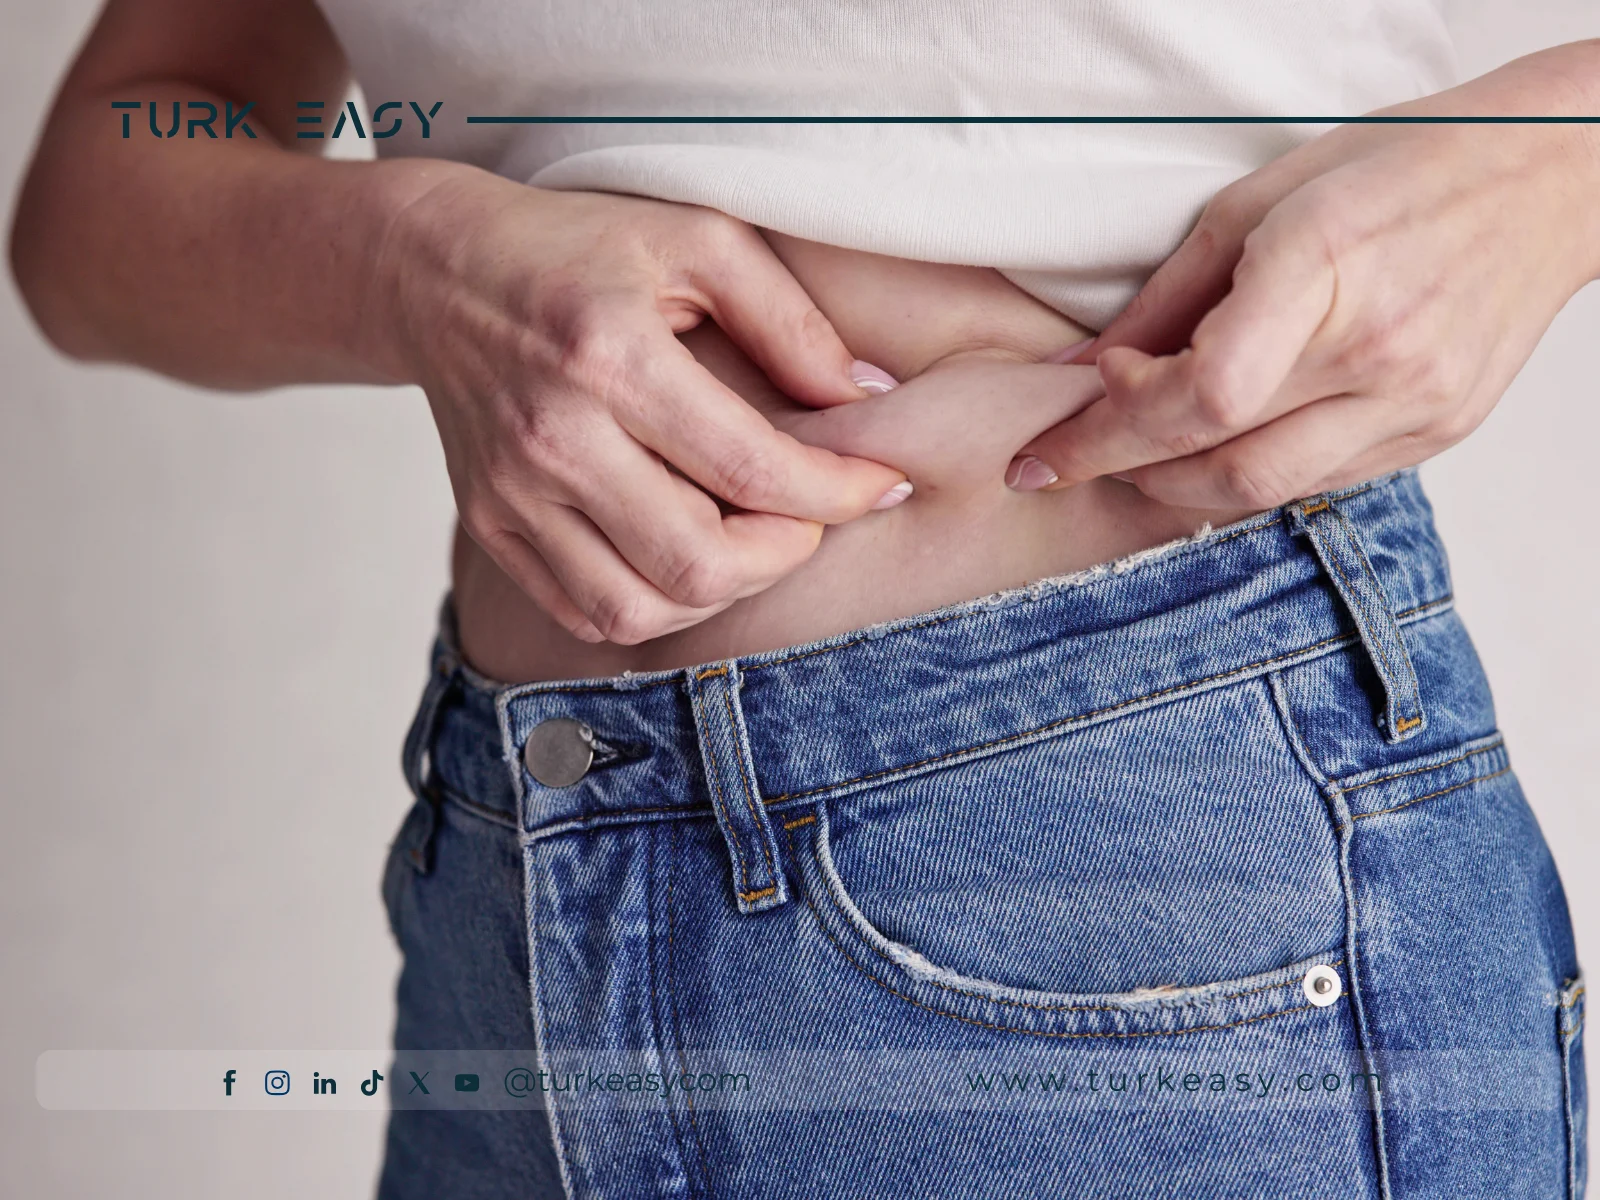 Abdominal Liposuction: Procedures and Golden Tips for Recovery